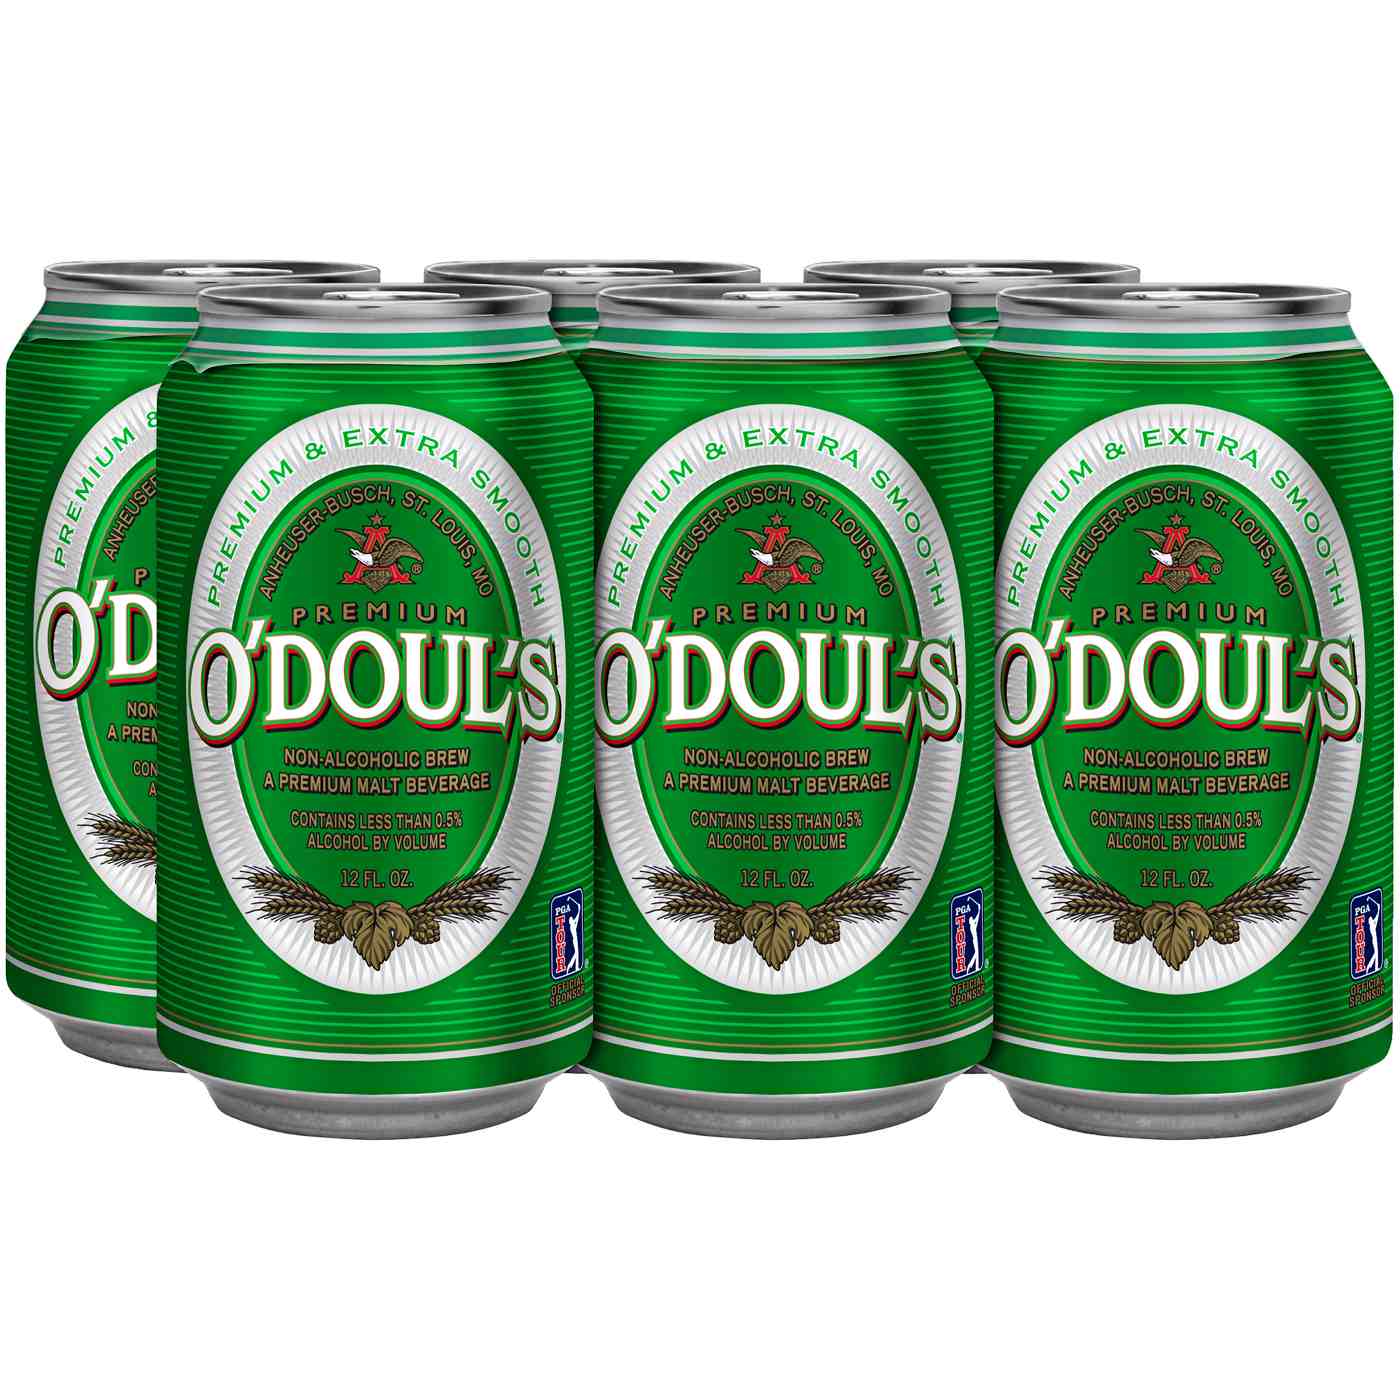 O'Douls Non-Alcoholic Beer 6 pk Cans; image 1 of 2